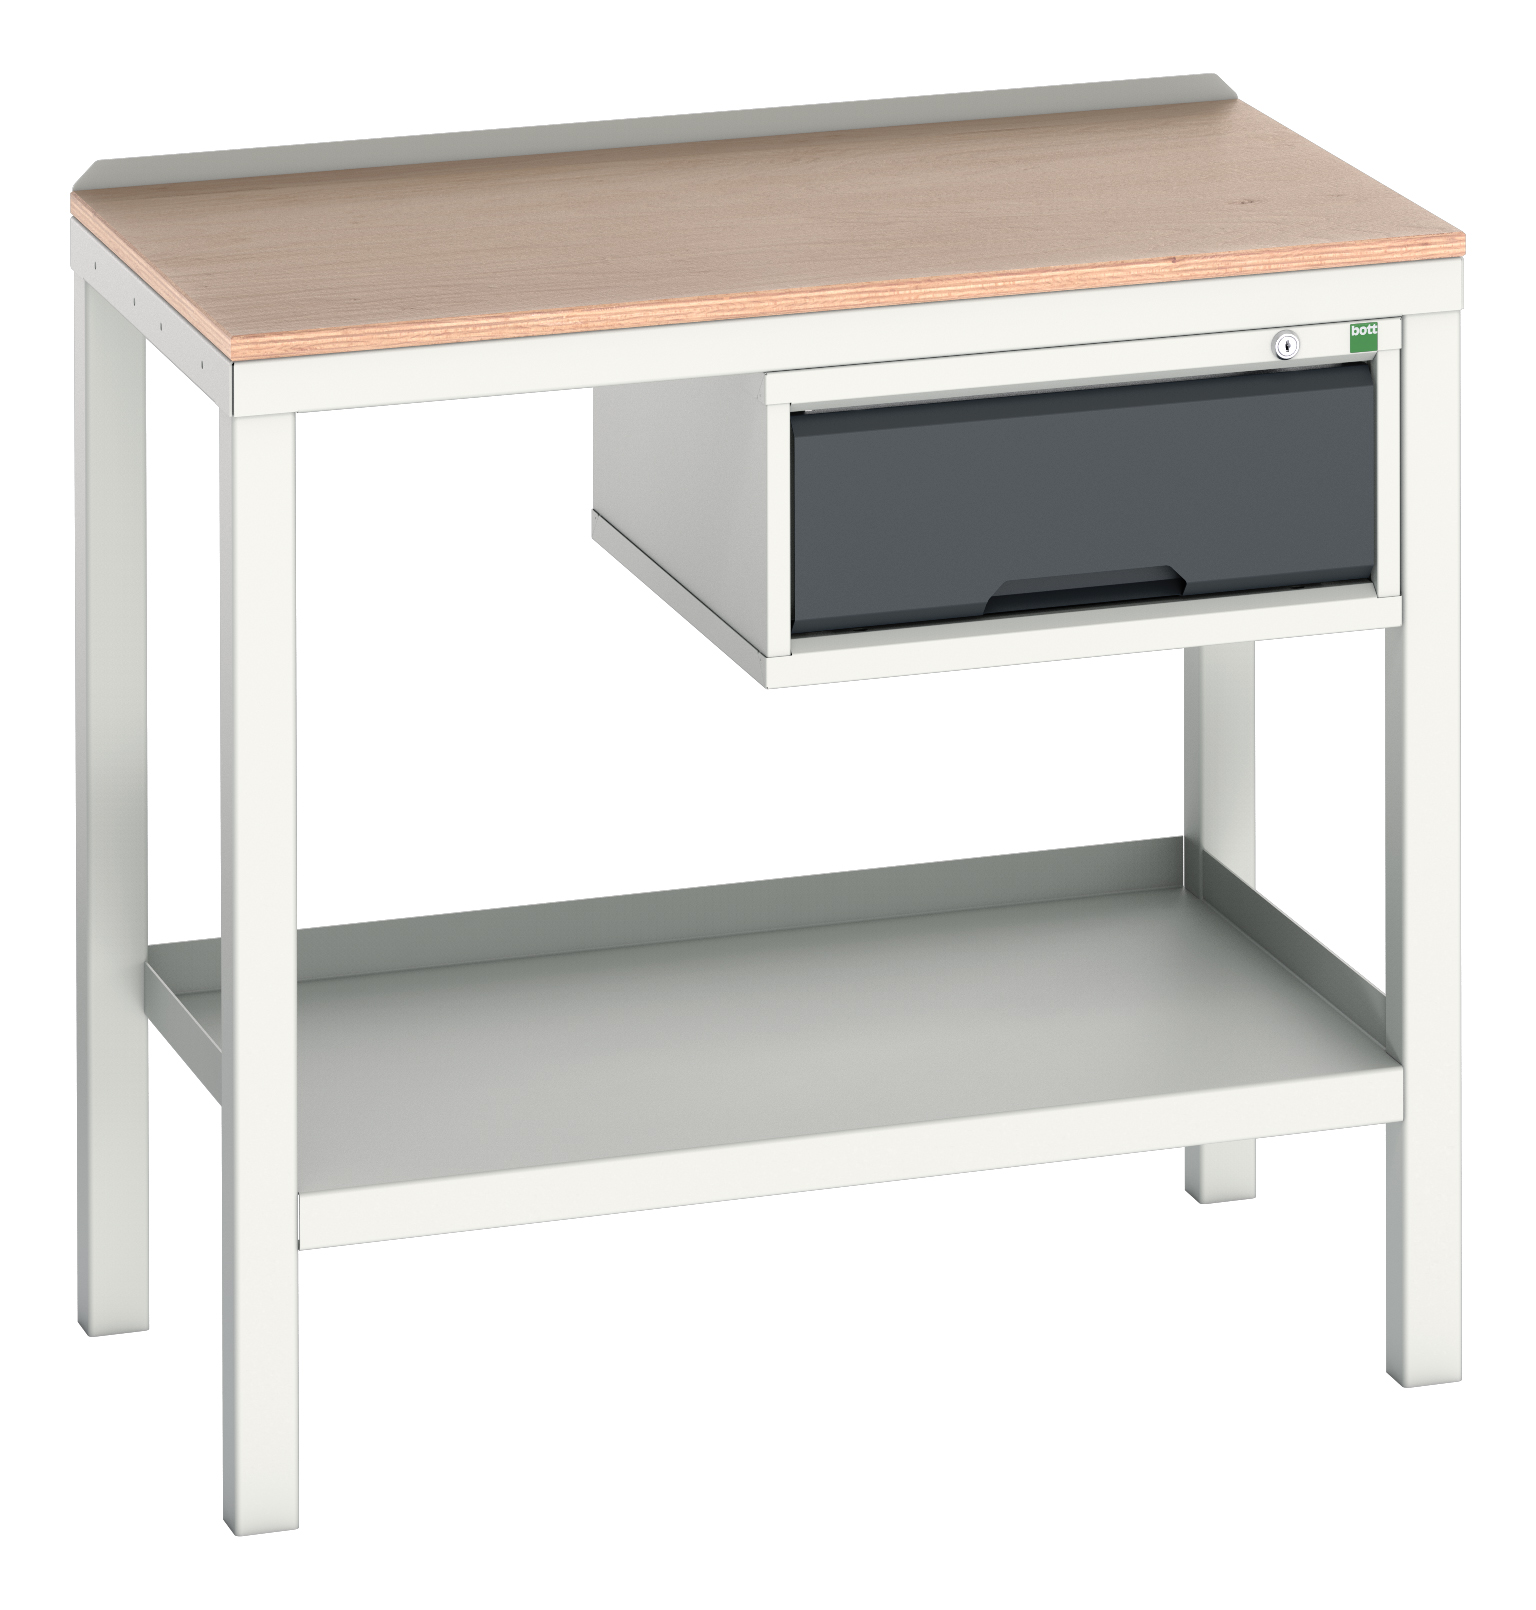 Bott Verso Welded Bench With 1 Drawer Cabinet - 16922601.19